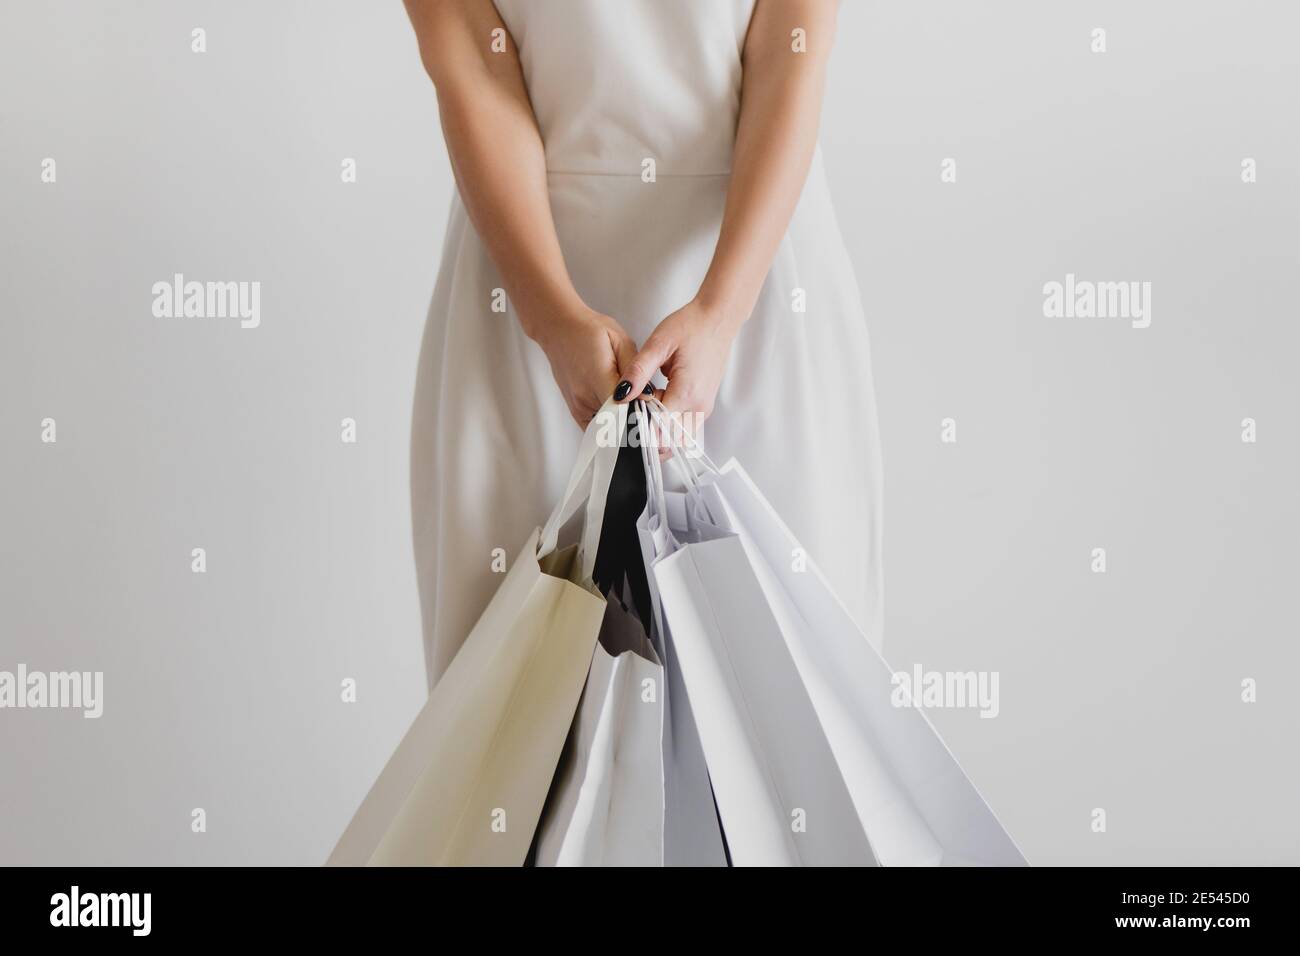 Cropped view of woman in white dress holding shopping bags on white background. Stock Photo